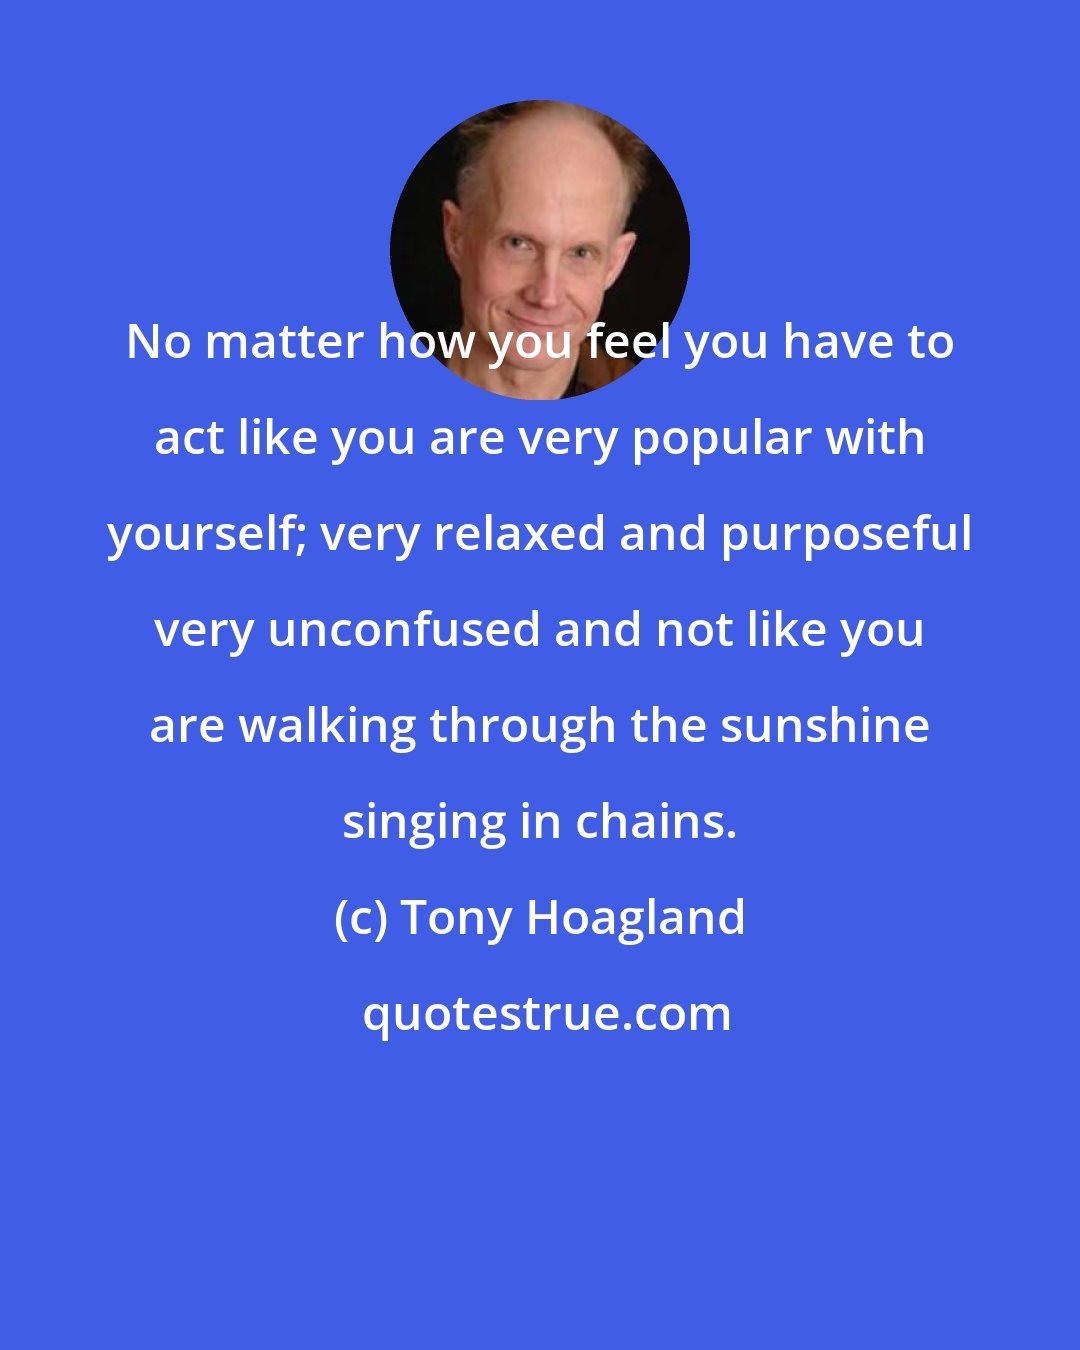 Tony Hoagland: No matter how you feel you have to act like you are very popular with yourself; very relaxed and purposeful very unconfused and not like you are walking through the sunshine singing in chains.